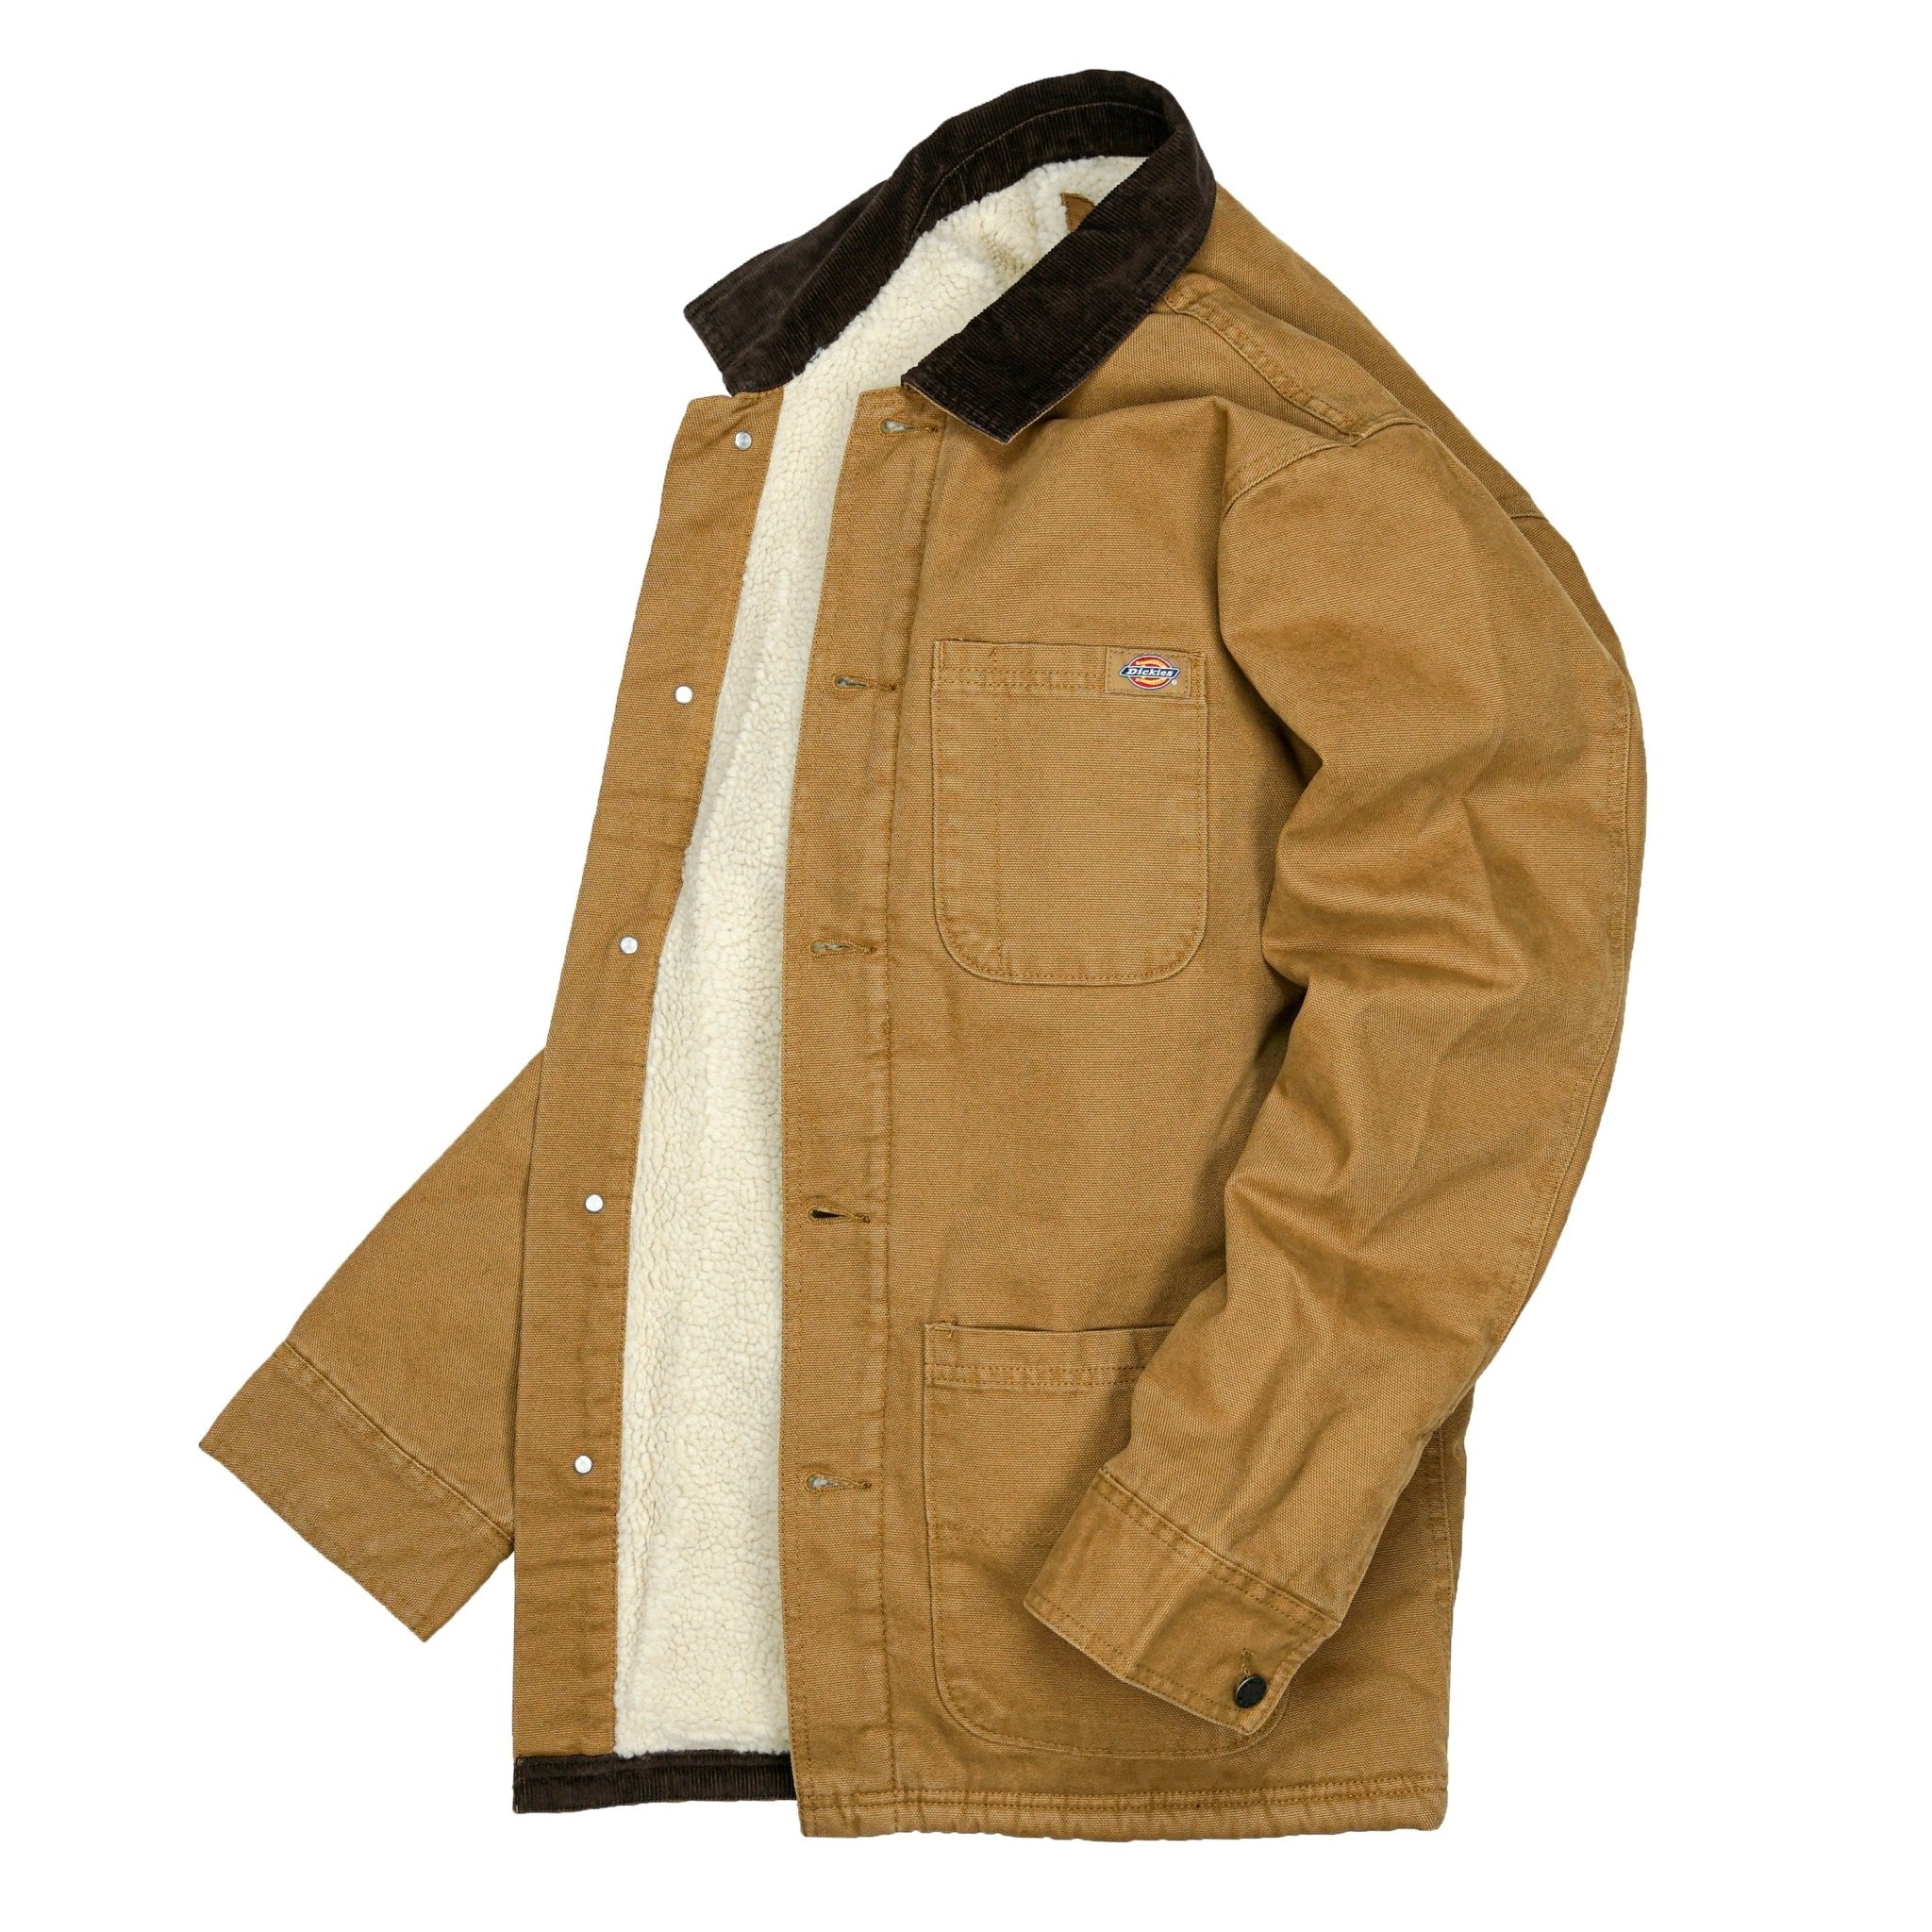 Duck Canvas Chore Coat in stonewashed brown duck